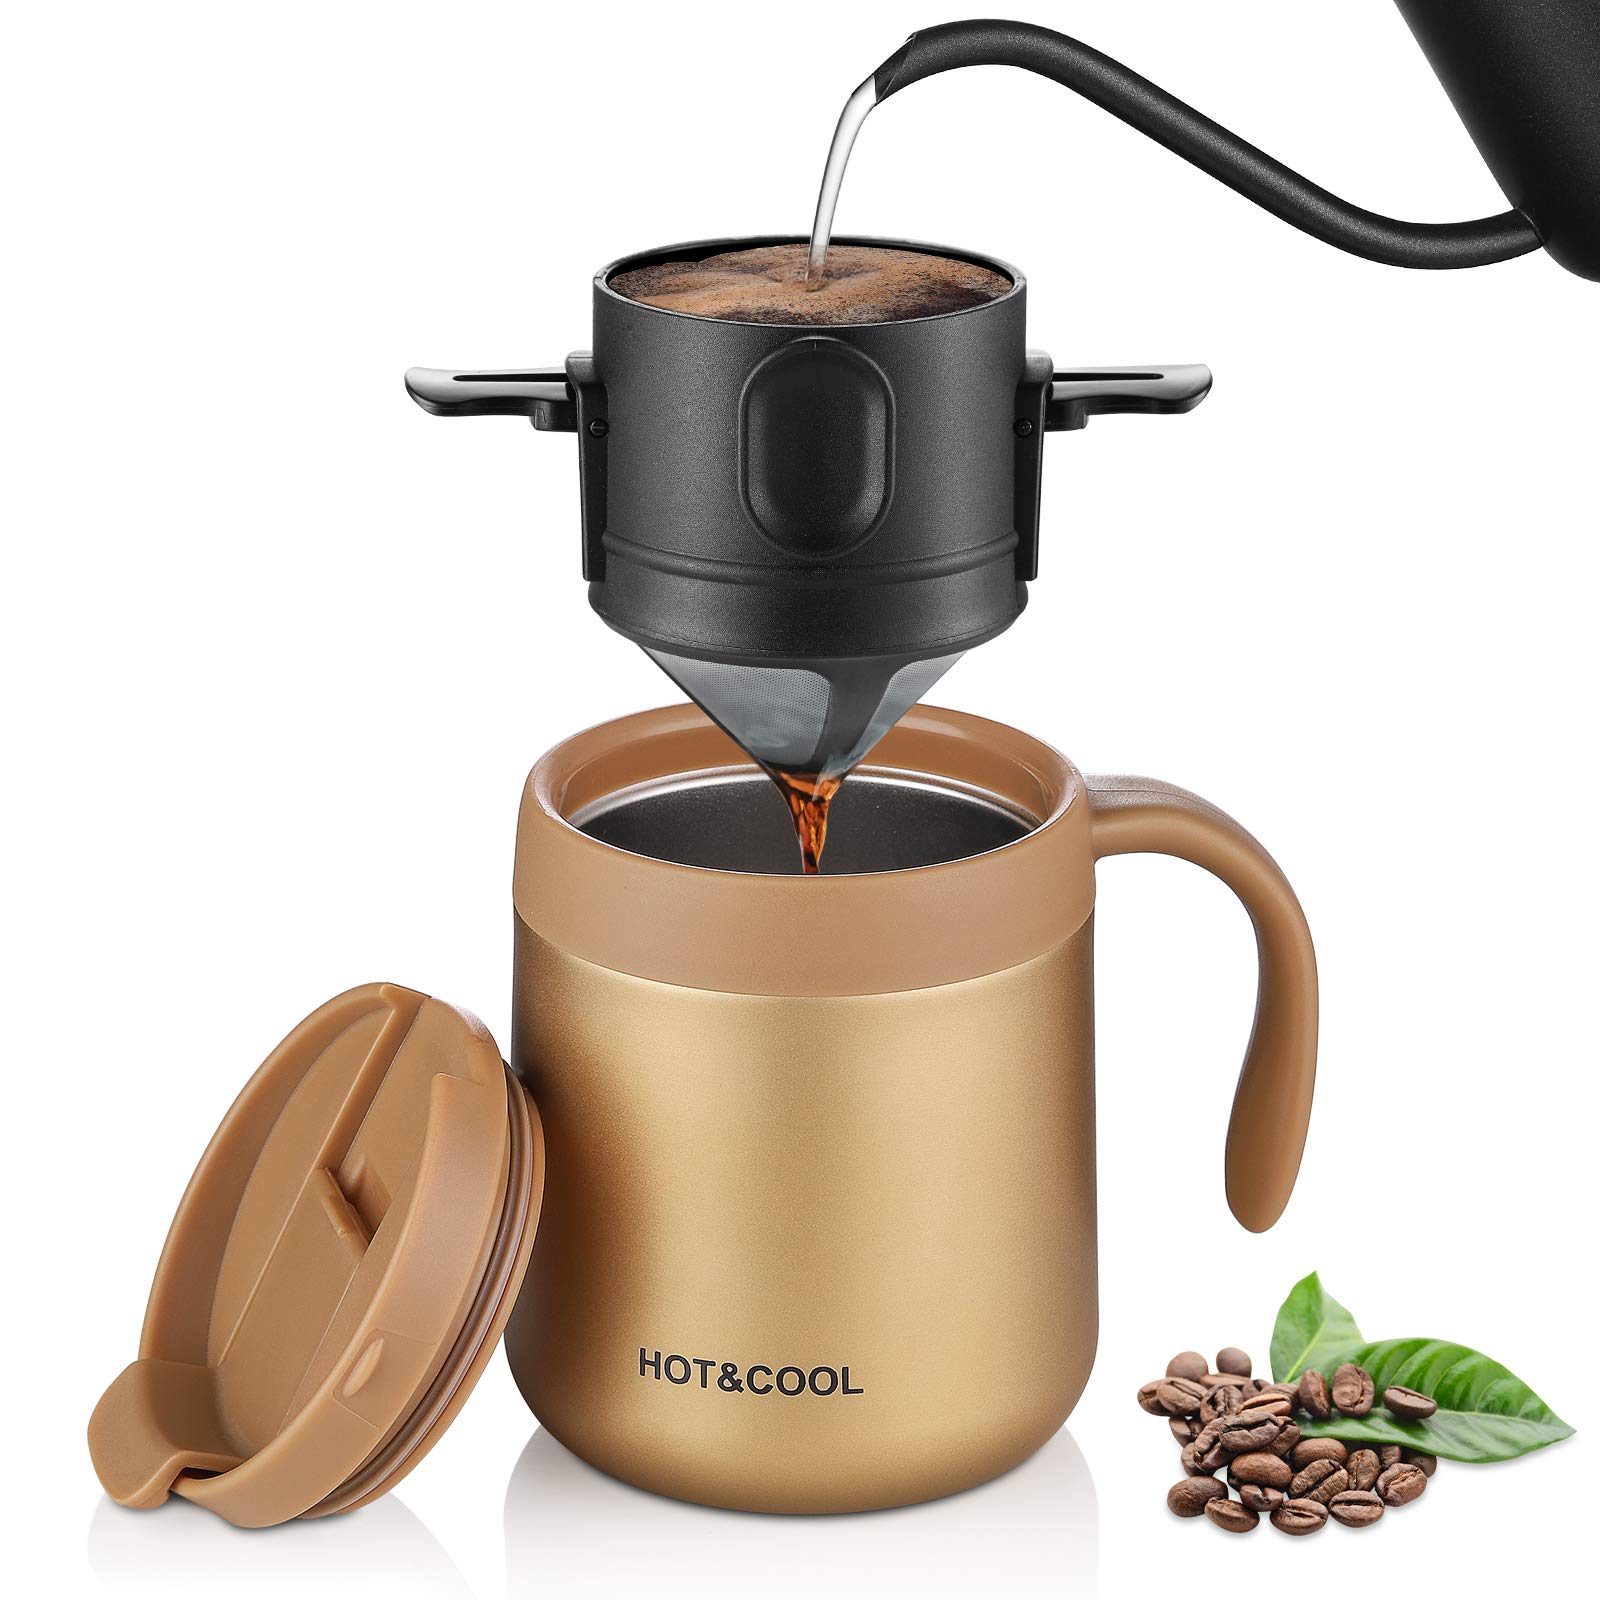 ONEISALL Camping Portable Coffee Maker Set with Stainless Steel Coffee Mug  + Collapsible Pour Over Coffee Filter - for Travel Camping Offices